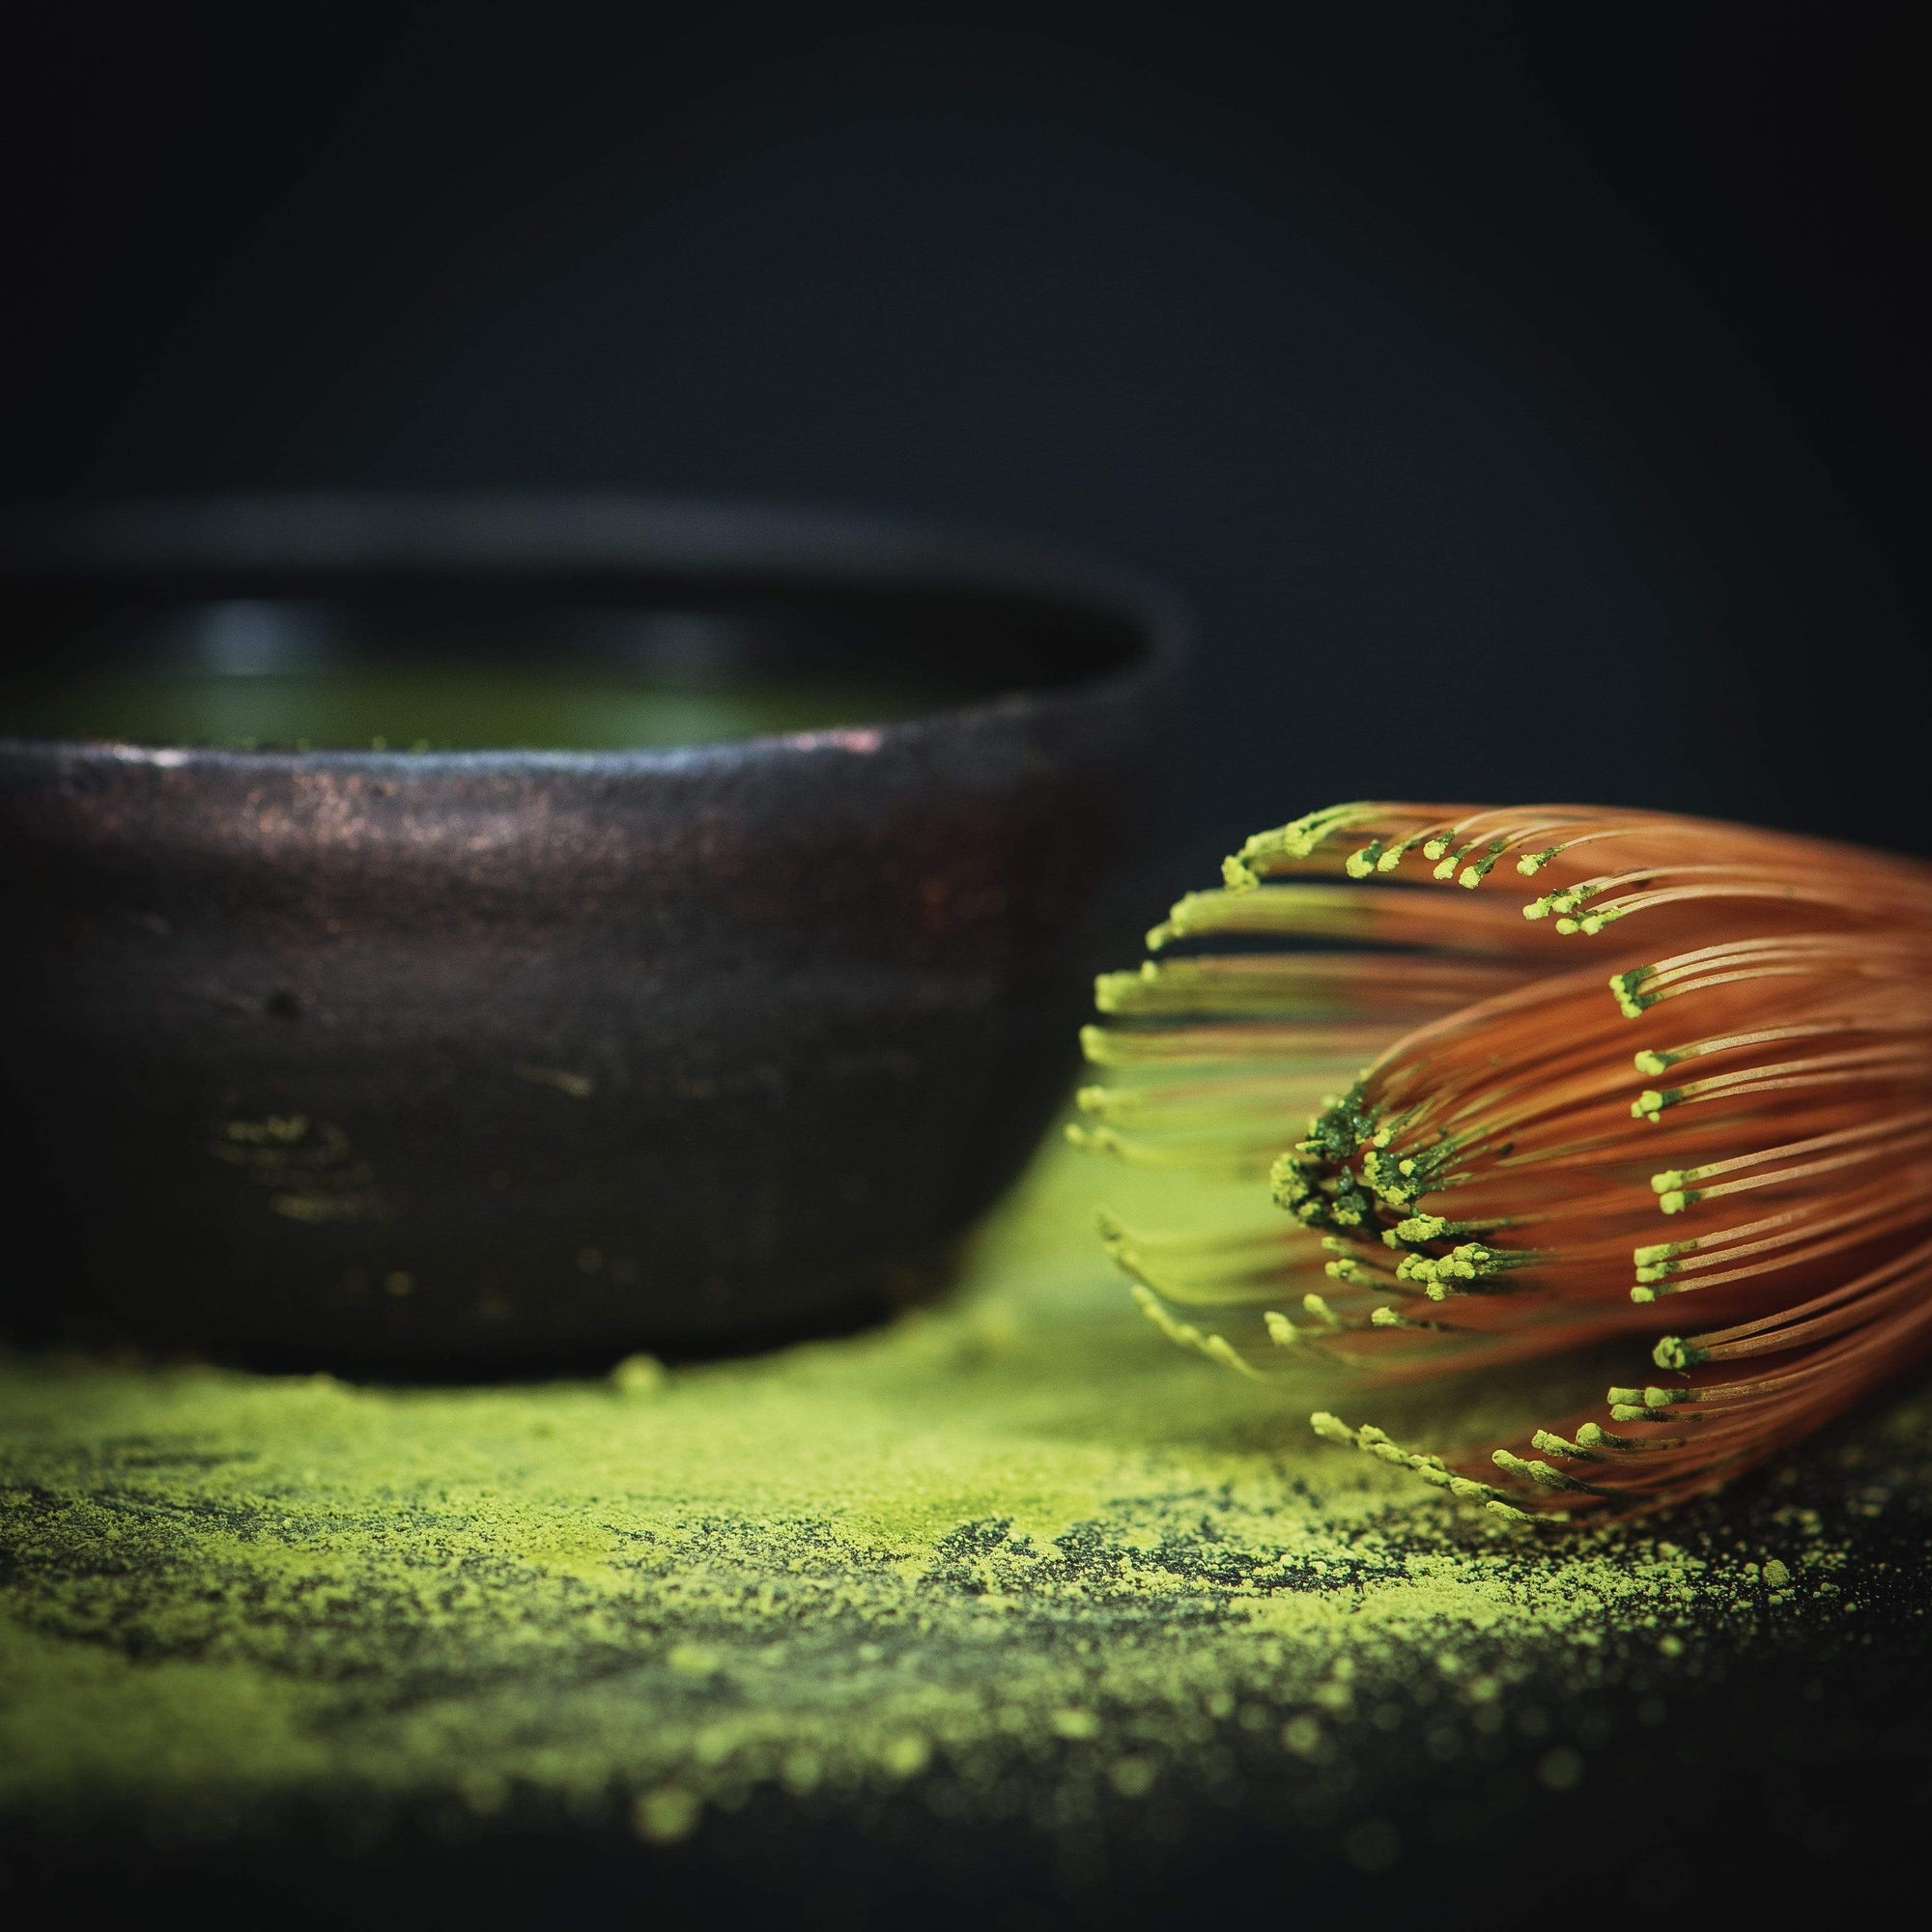 A Ceremonial Matcha Freedom Box with green matcha powder on its bristles lies next to a rustic brown ceramic bowl. The surface is speckled with organic tea powder from Magic Hour, creating a vibrant contrast against the dark background.